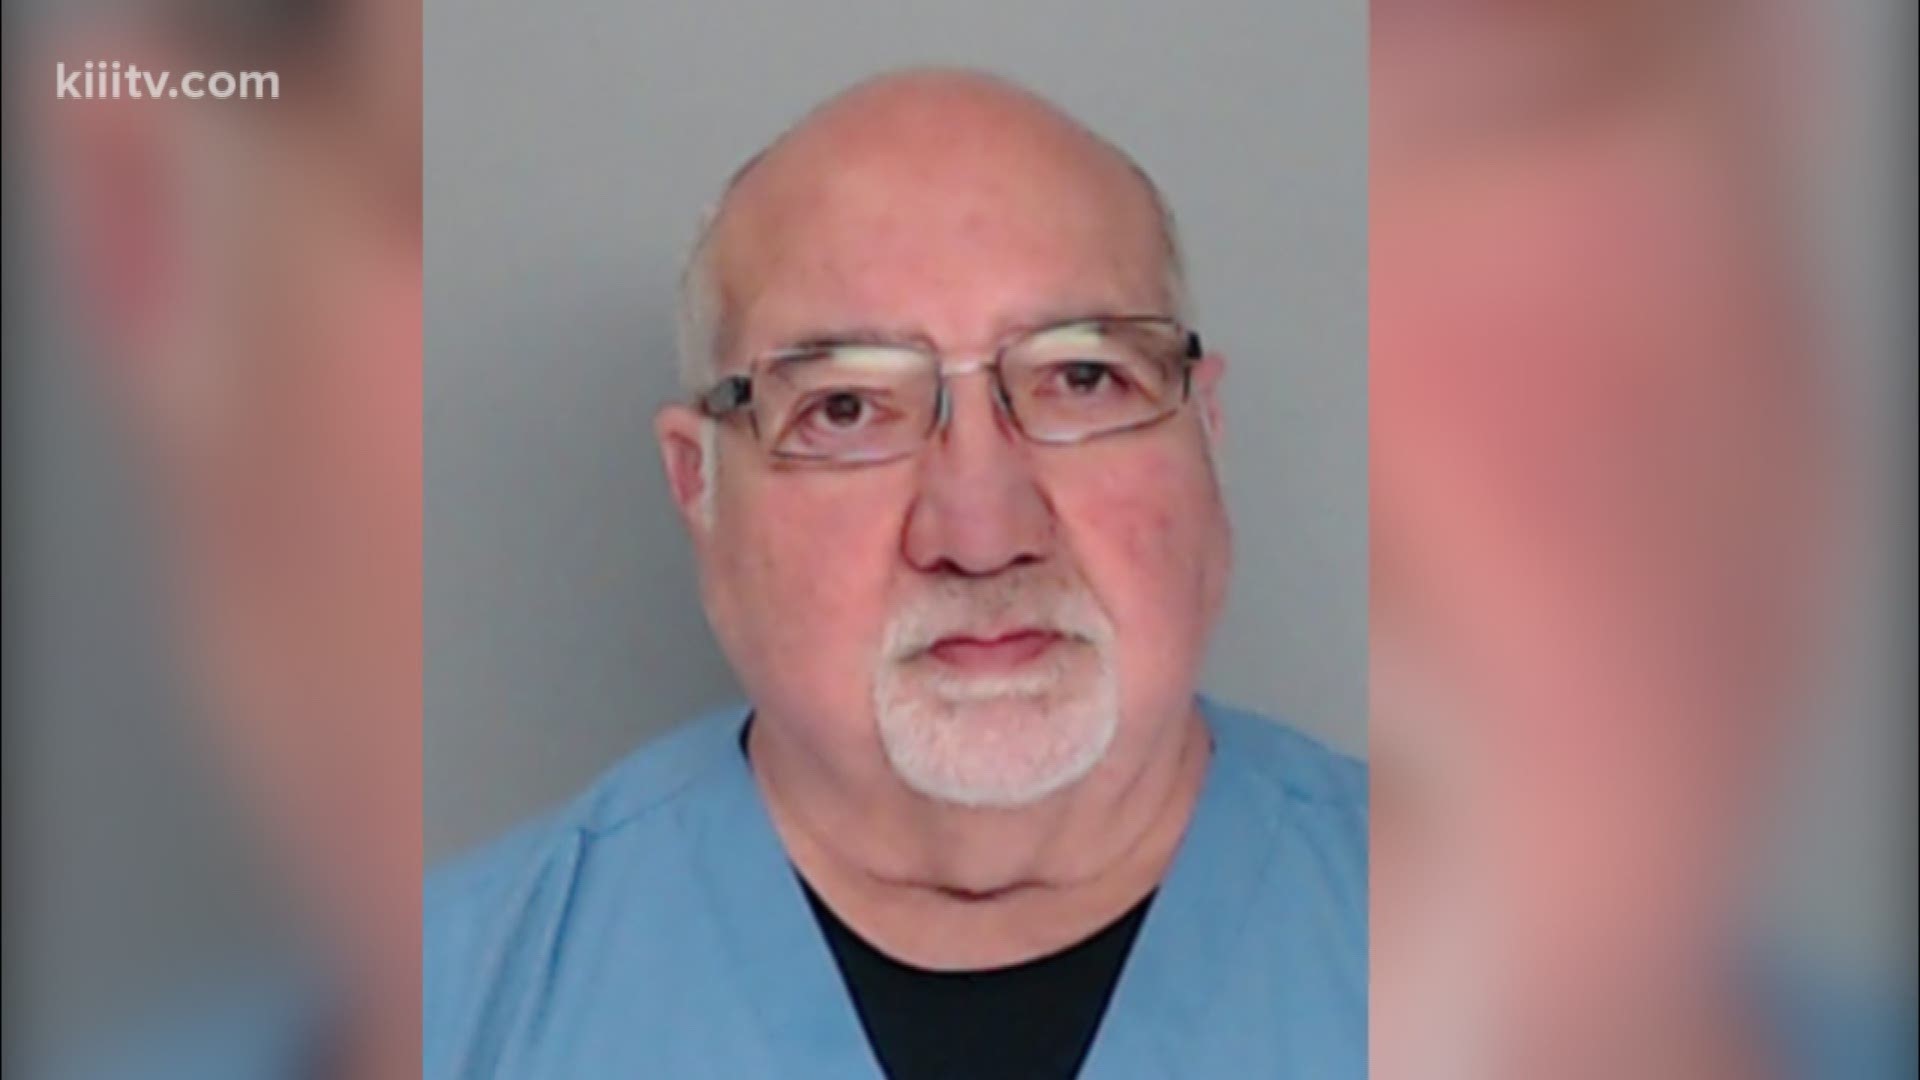 A Coastal Bend OBGYN doctor has been indicted on charges of felony sexual assault.